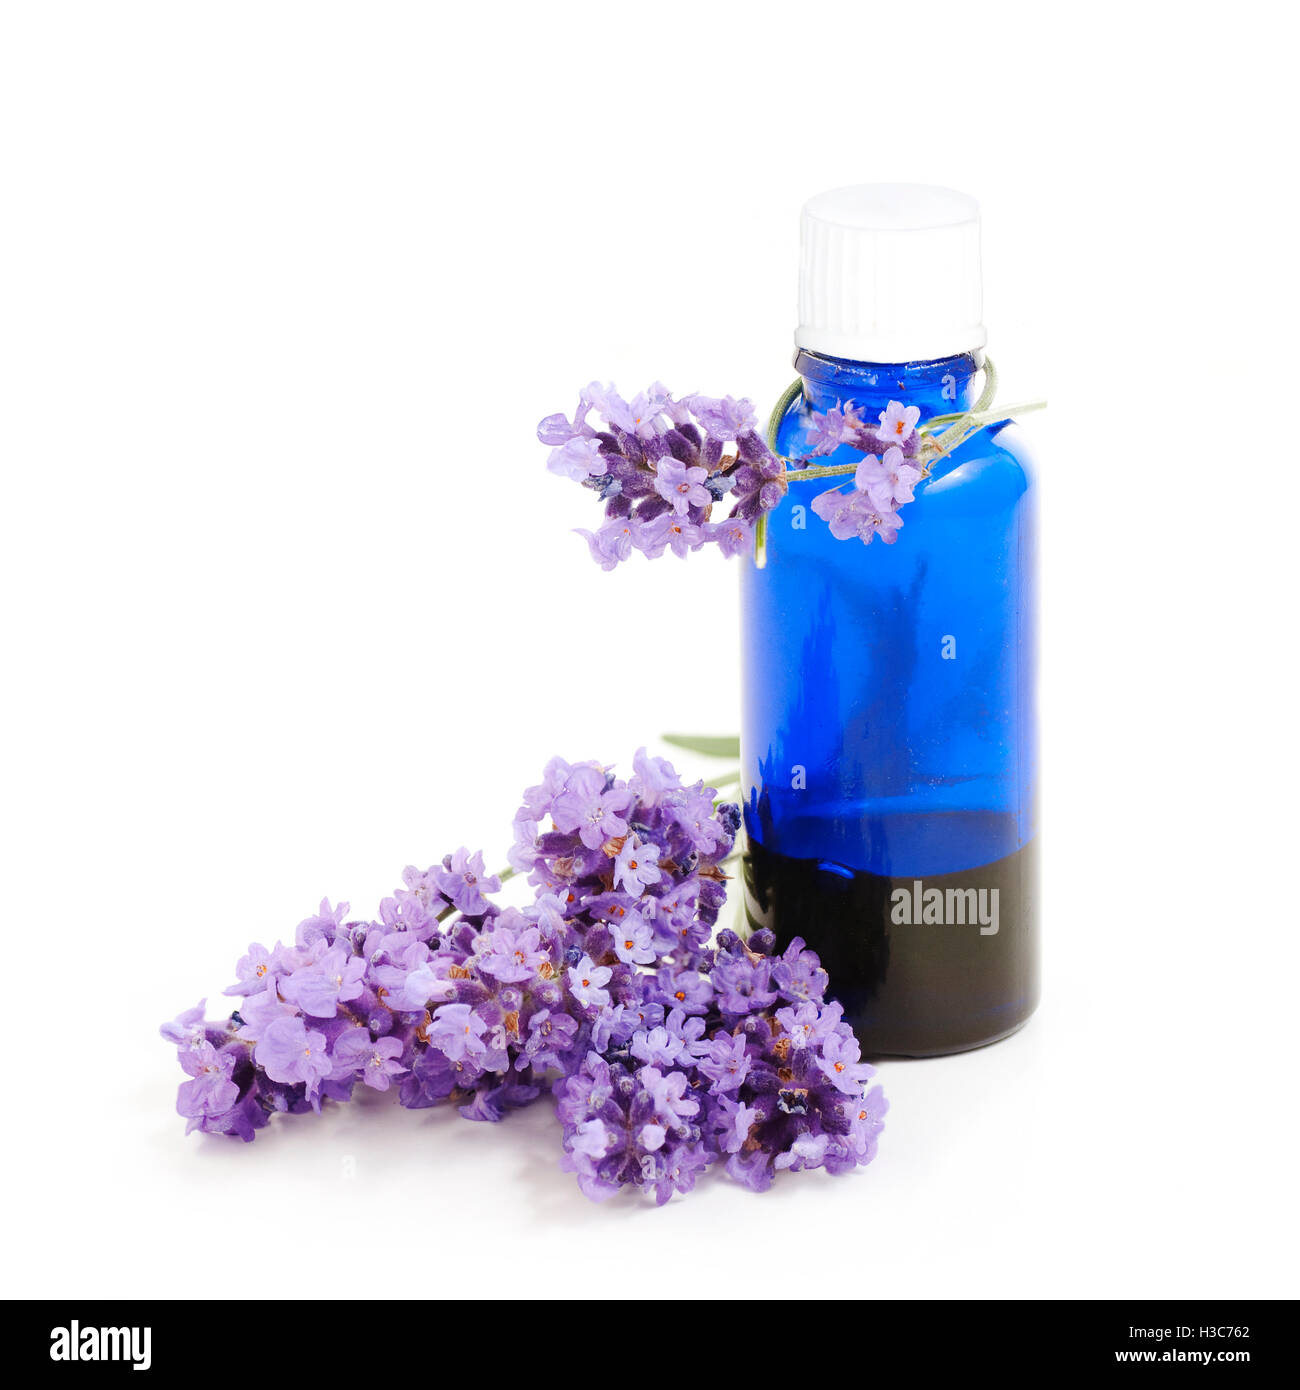 flowers of lavender and blue bottle on a white background Stock Photo